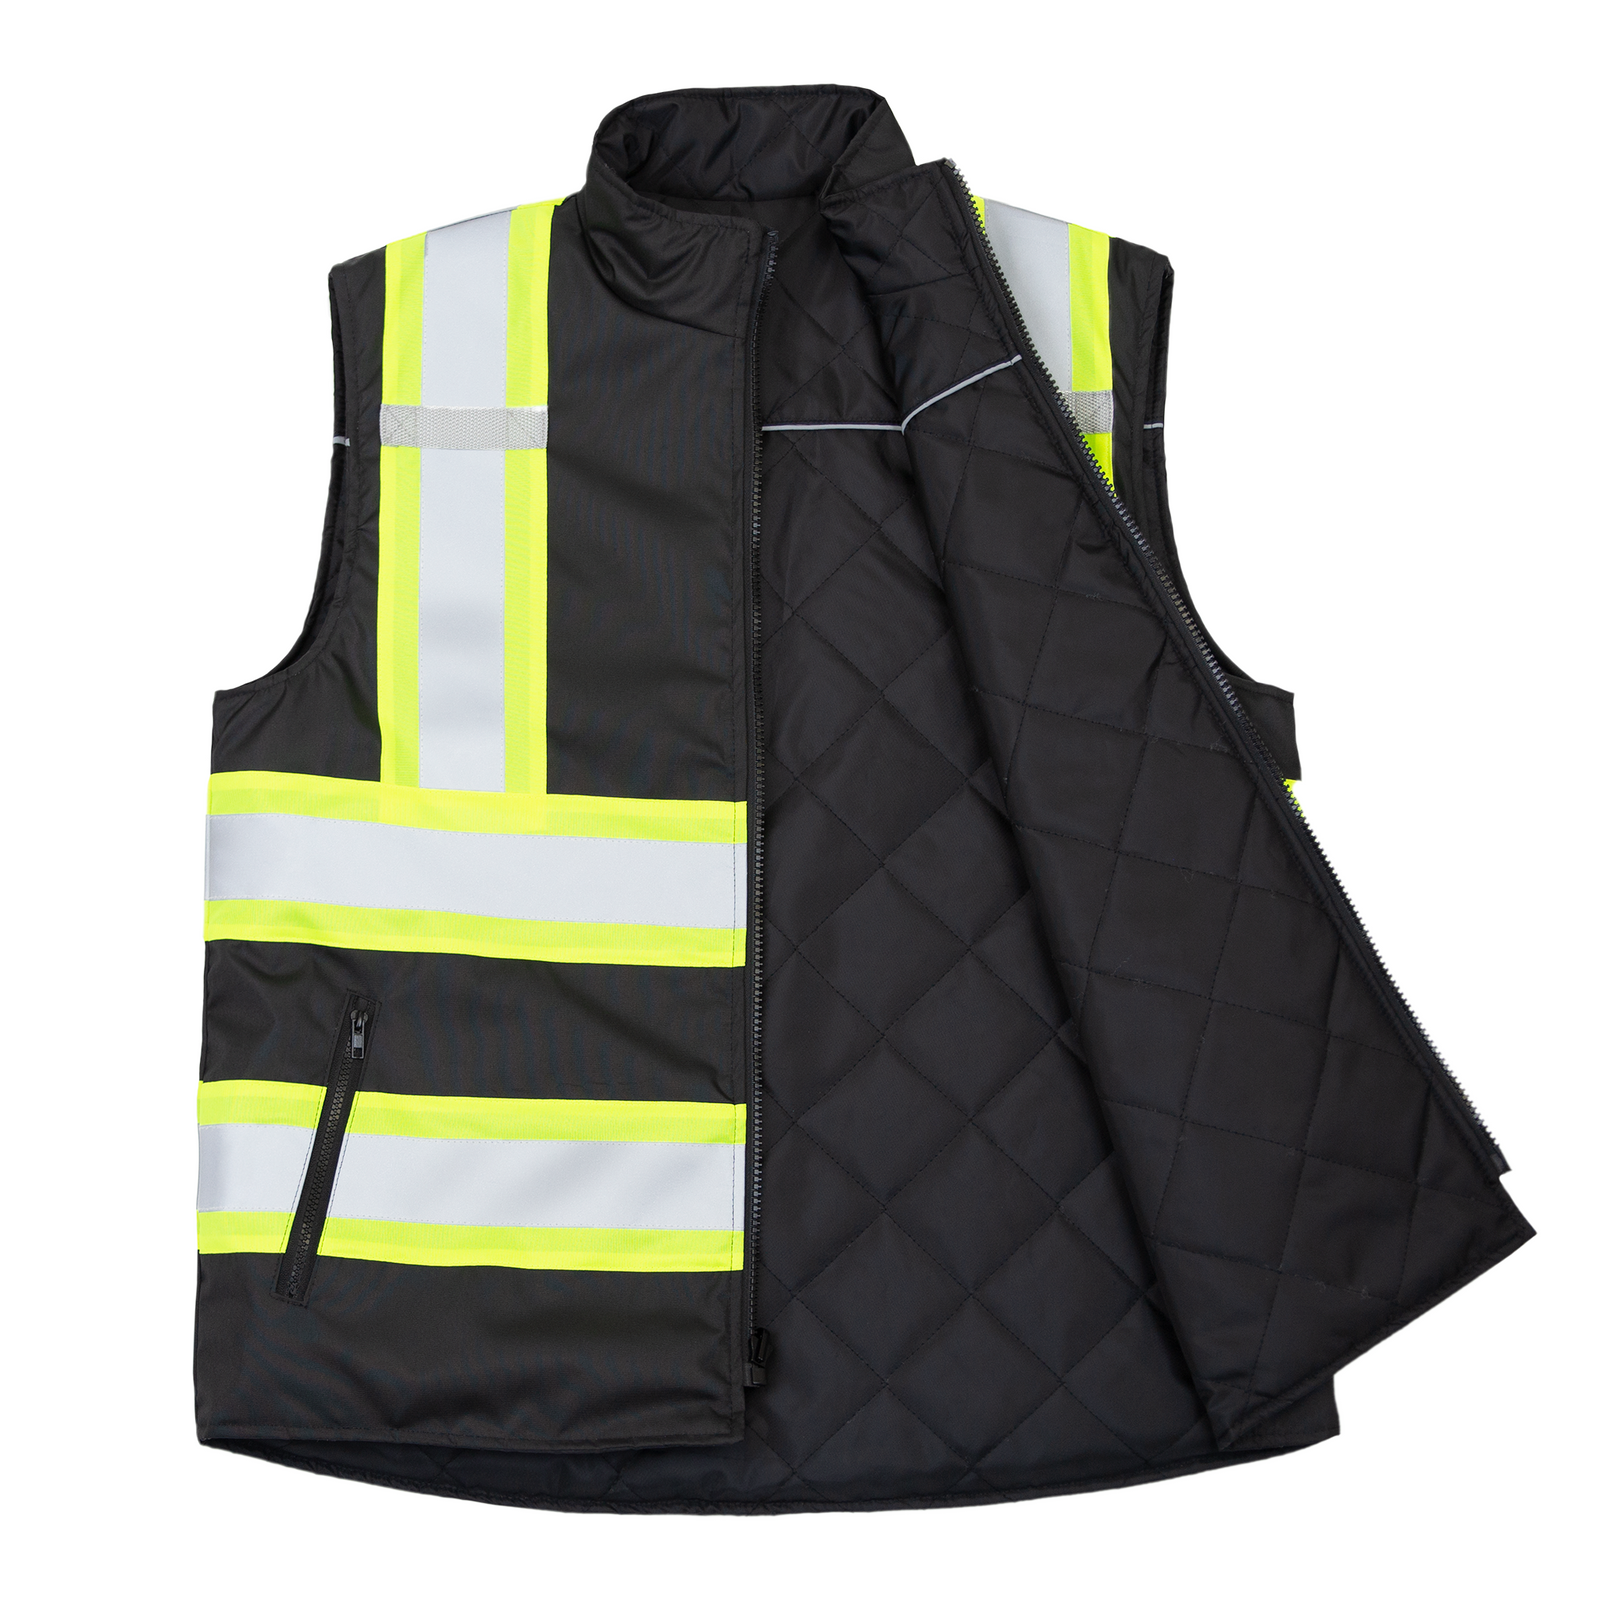 Diagonal view of the JORESTECH® reflective black reversible insulated safety vest with yellow contrasting stripes